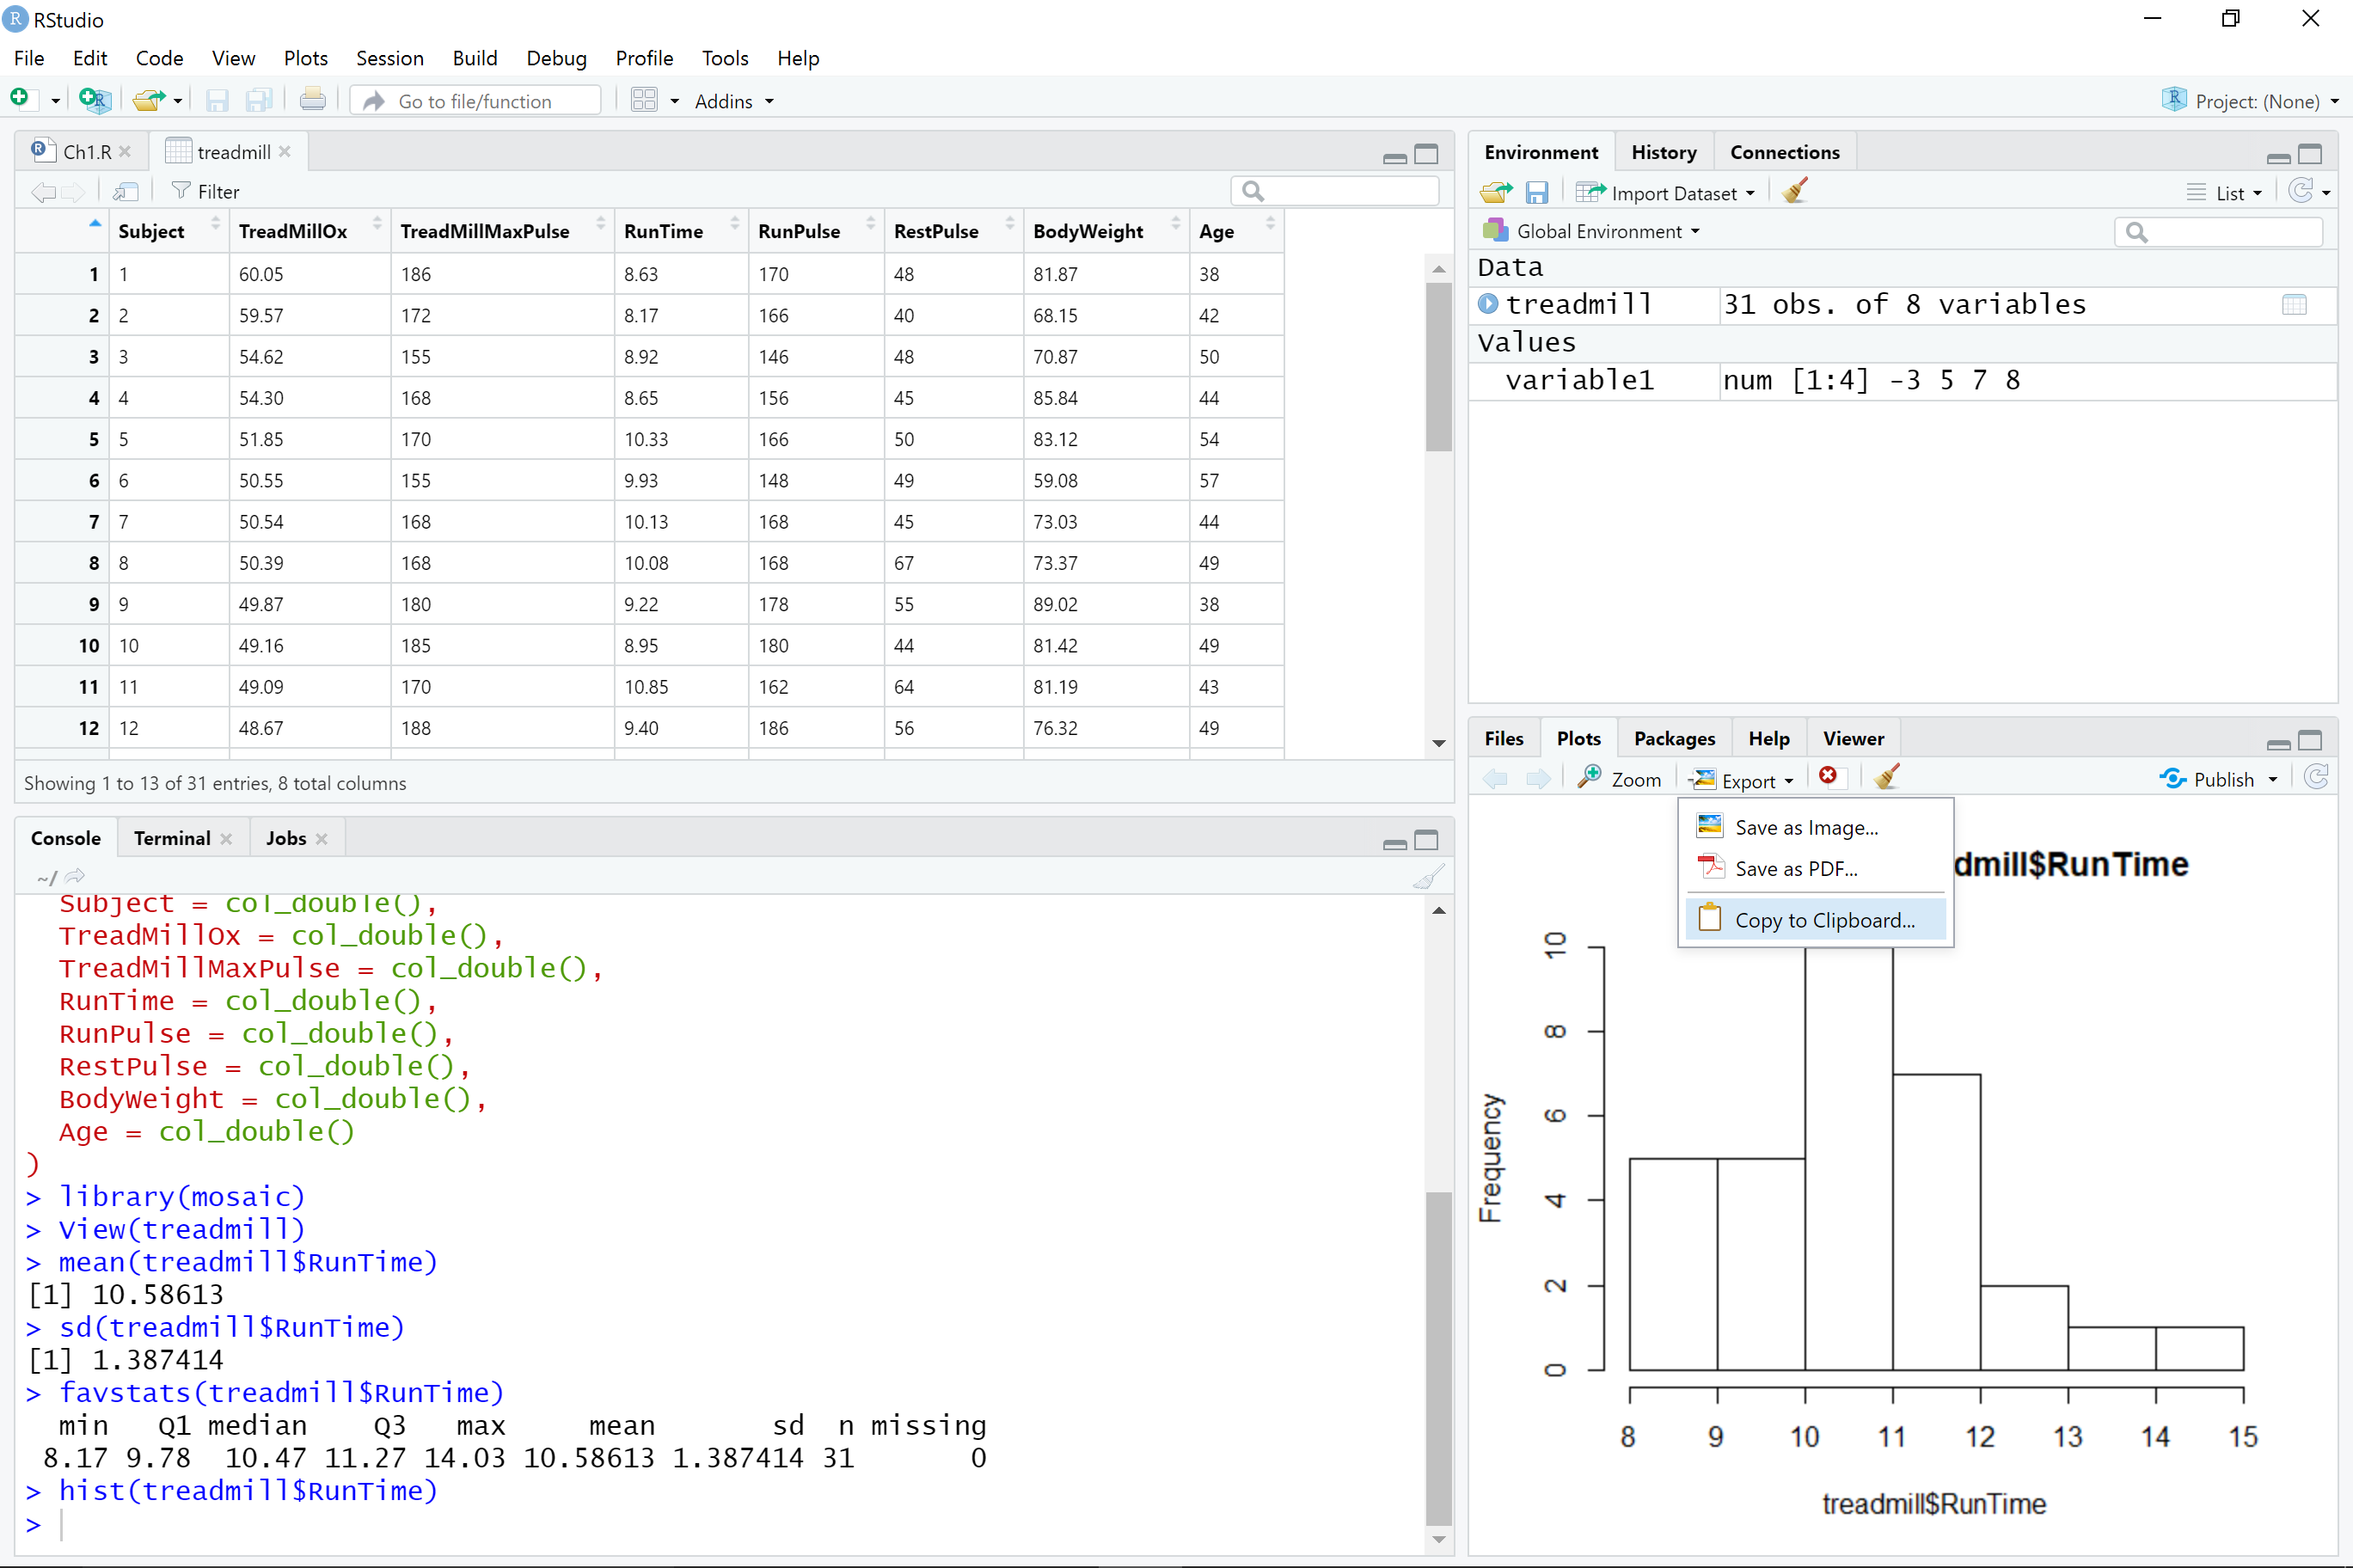 RStudio while in the process of copying the histogram.